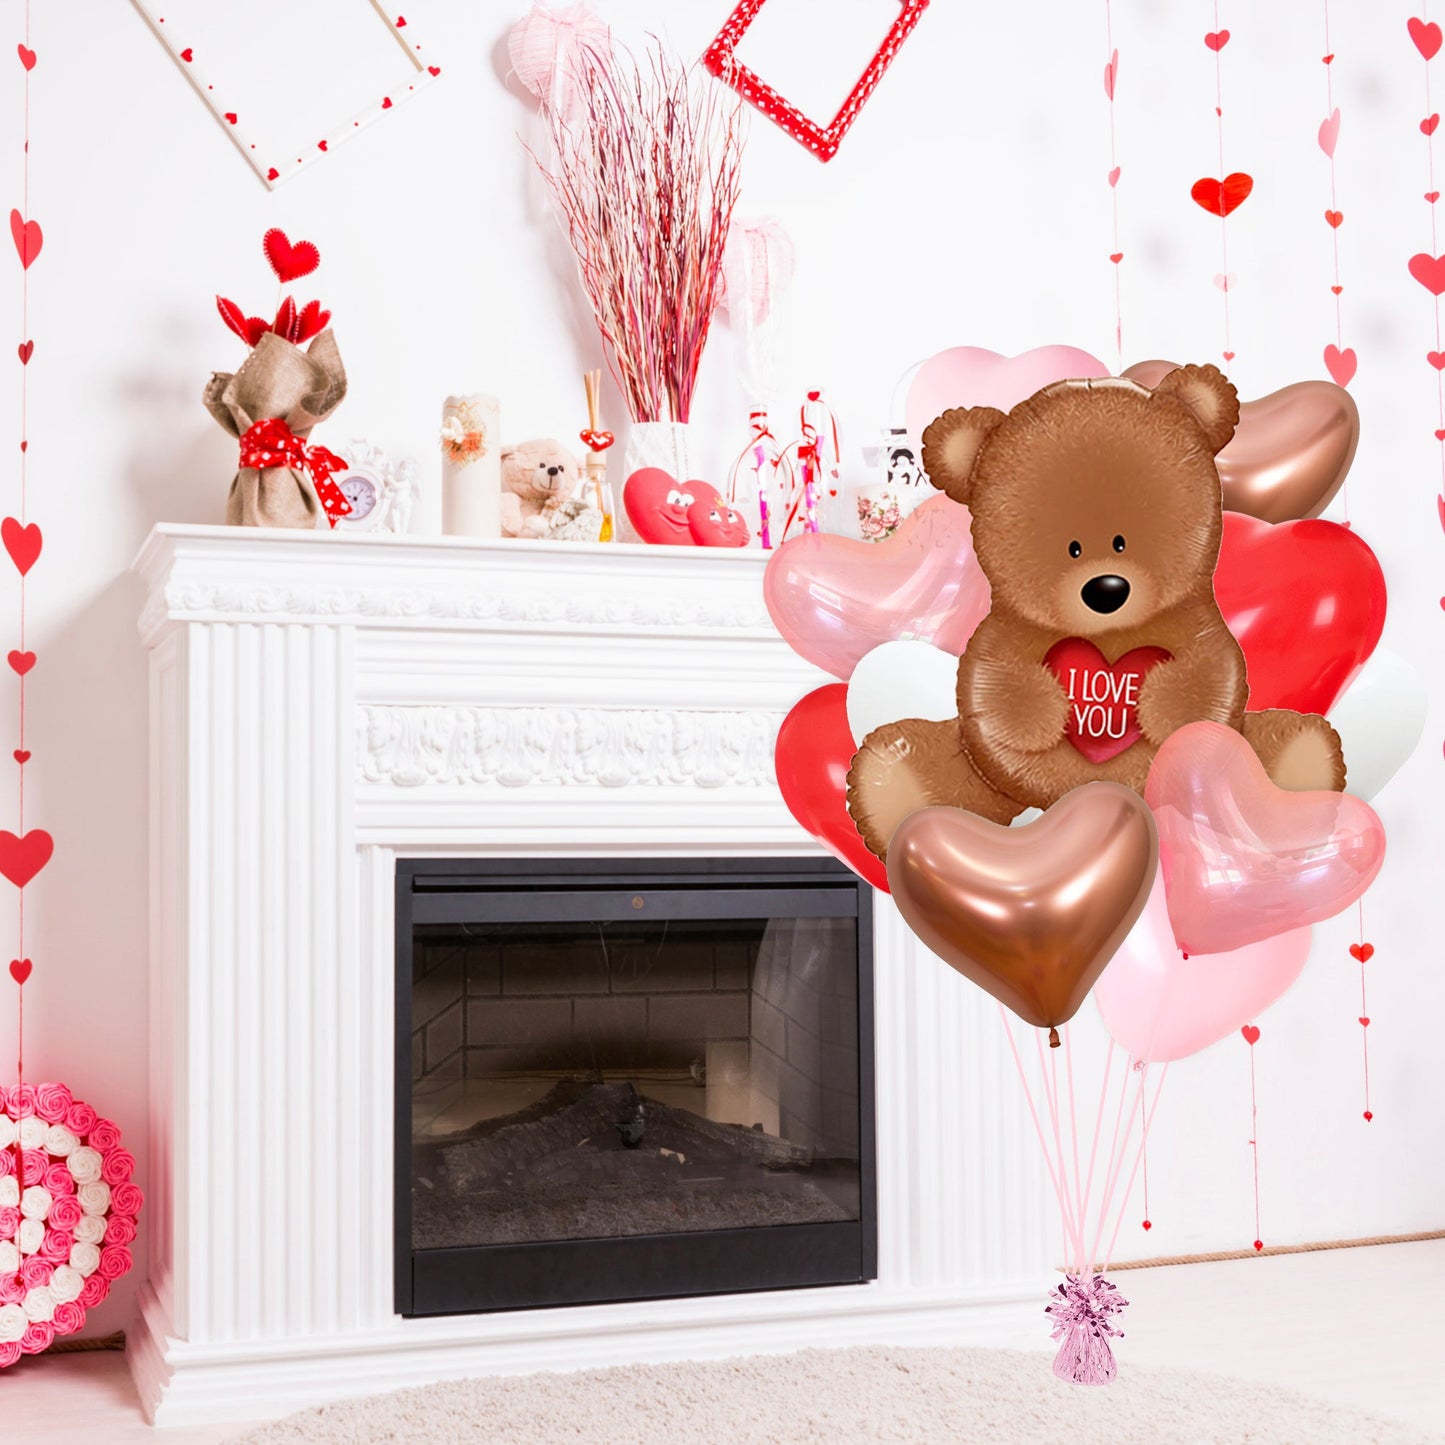 Teddy Bear I Love You Heart Balloon Bouquet Kit (11 Pack) - Ellie's Party Supply